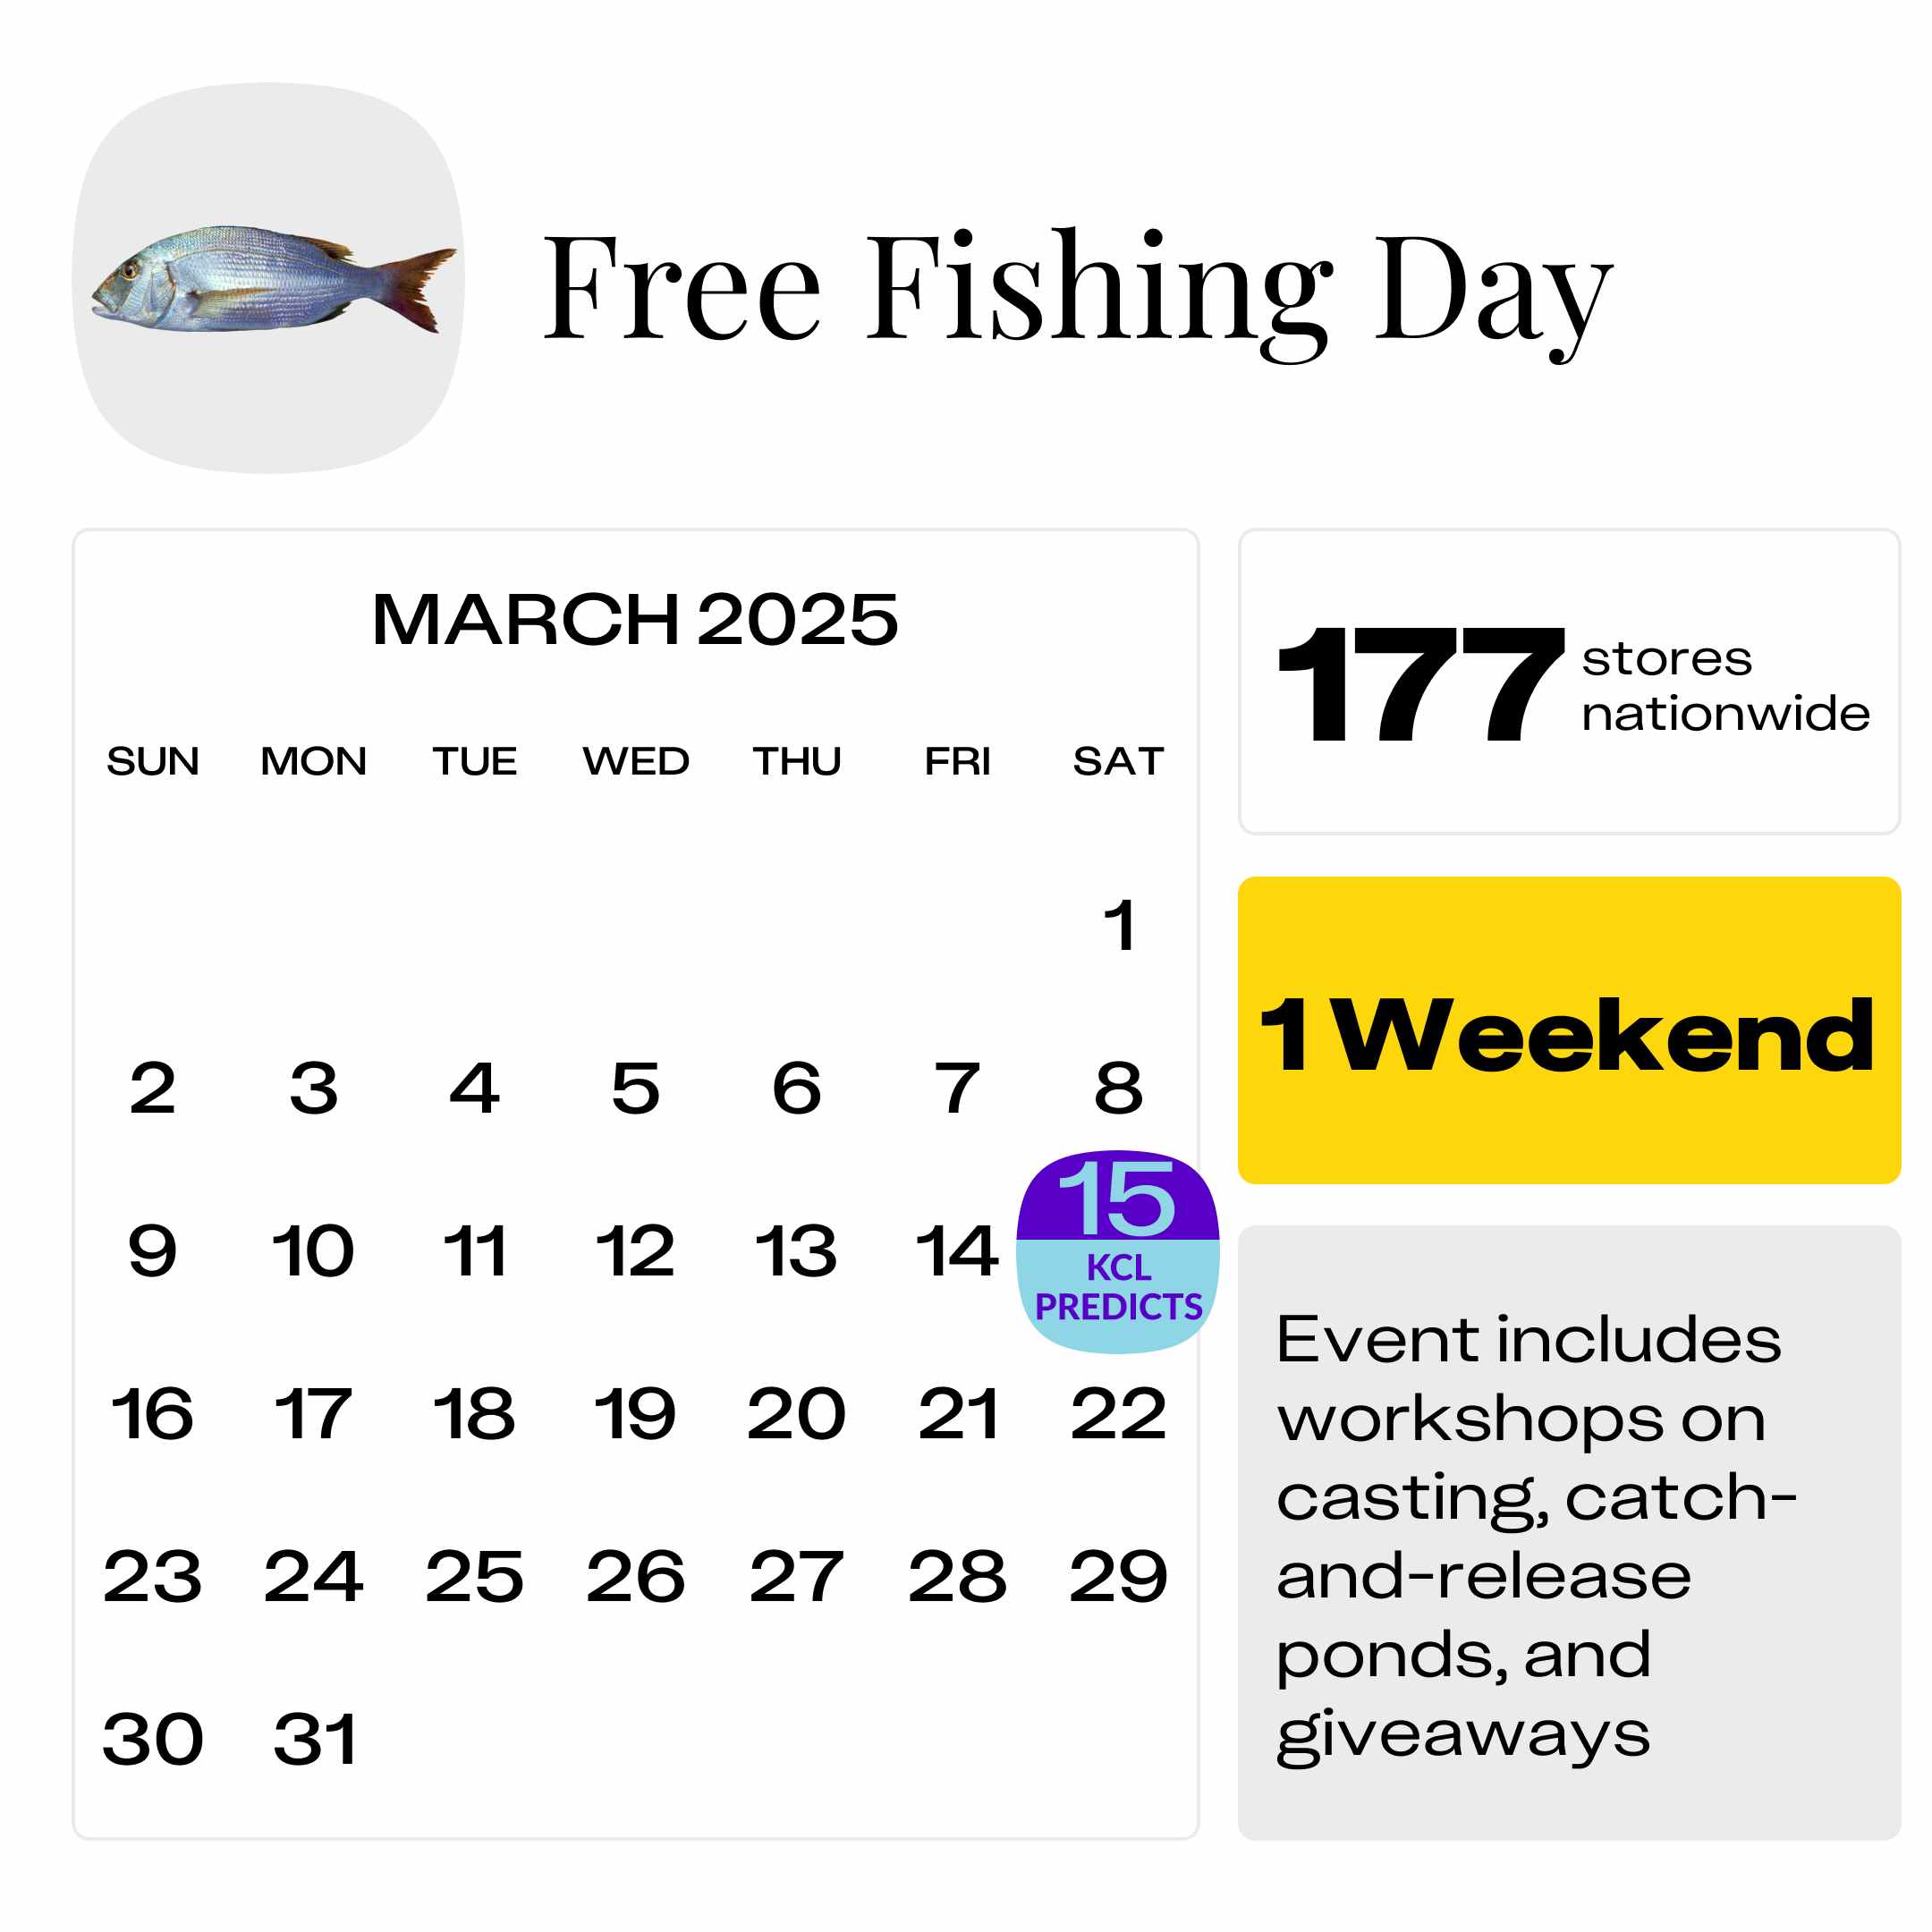 Free-Fishing-Day-March-2025 (1)